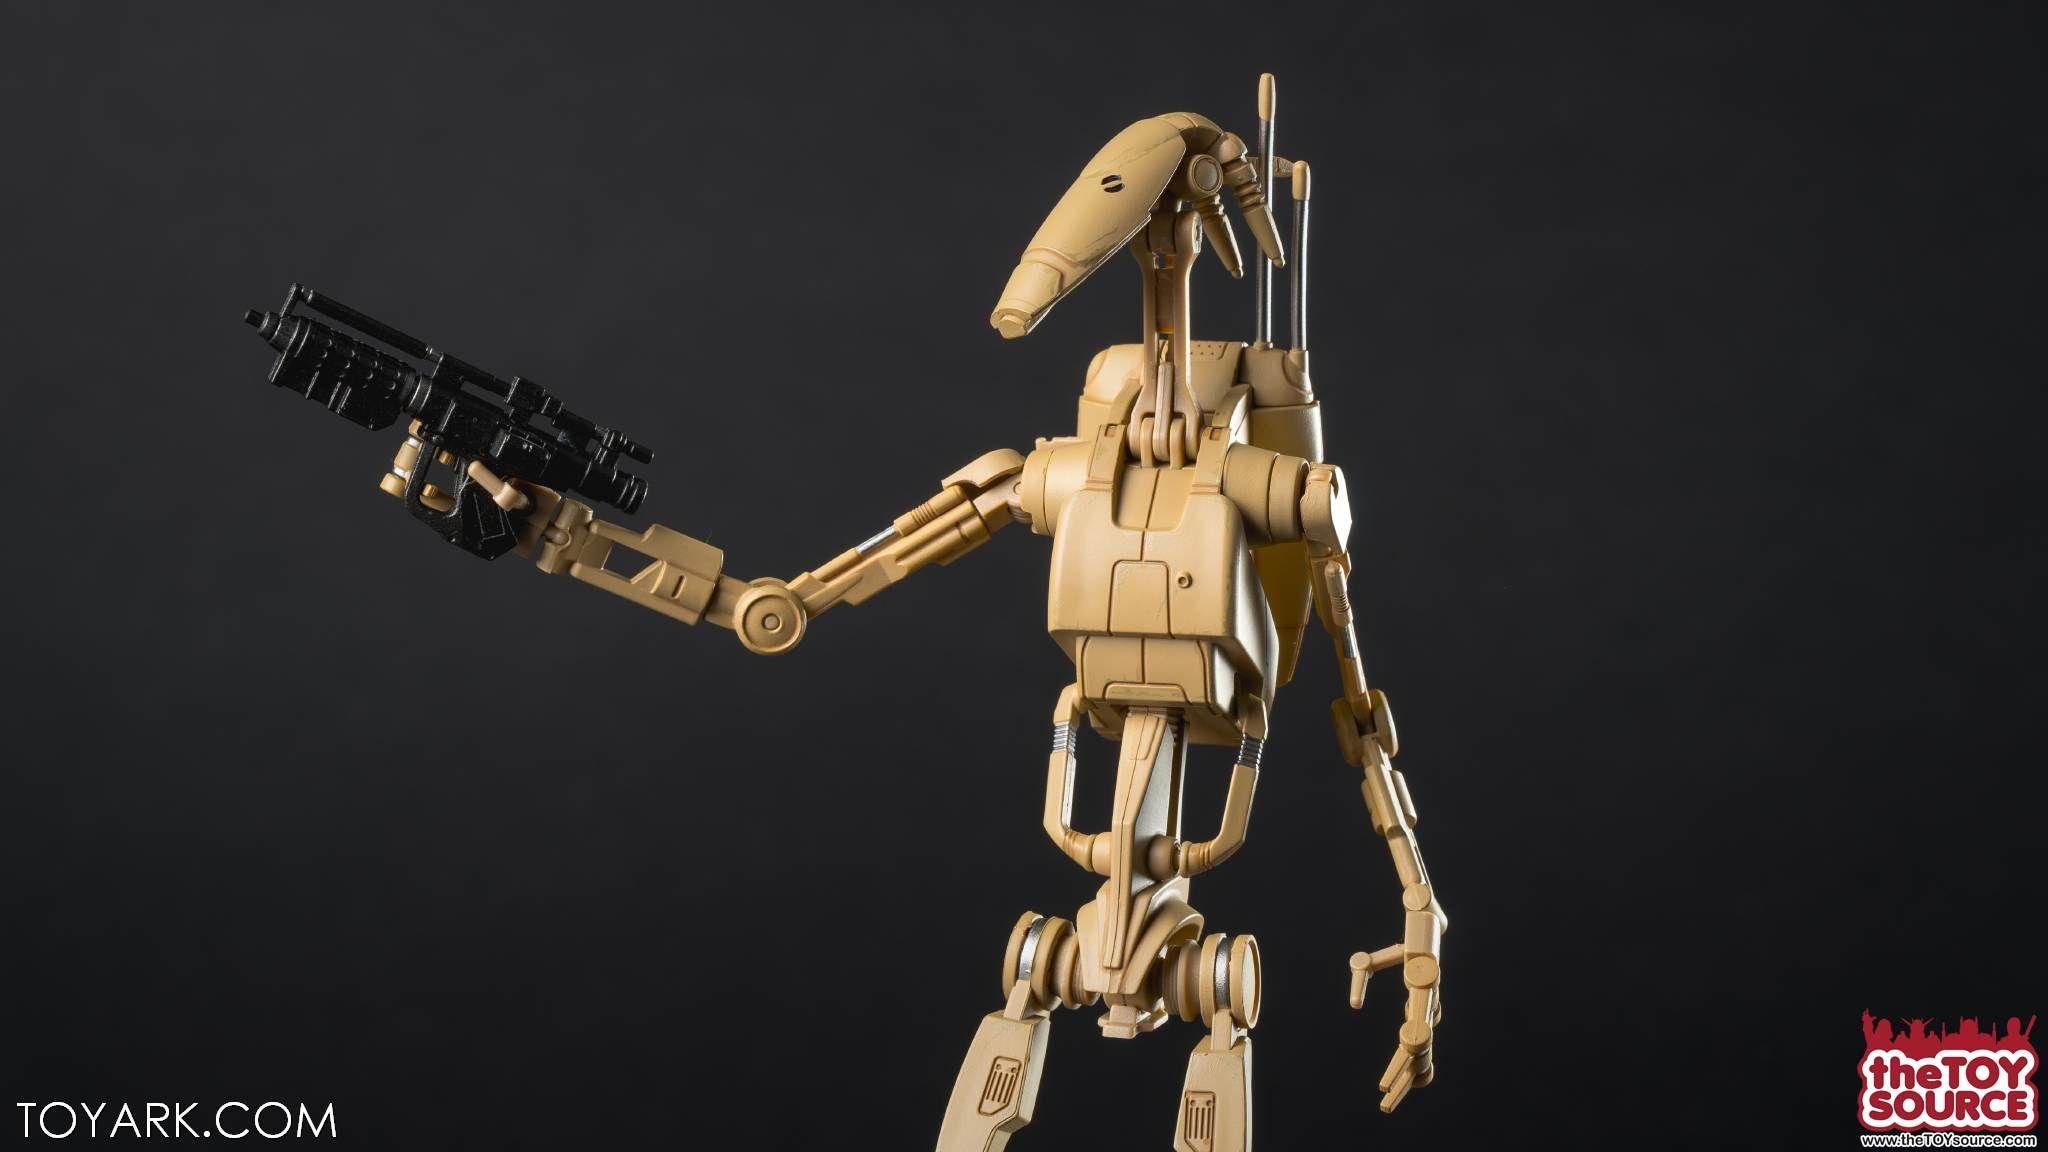 S.H. Figuarts Star Wars Battle Droid Gallery